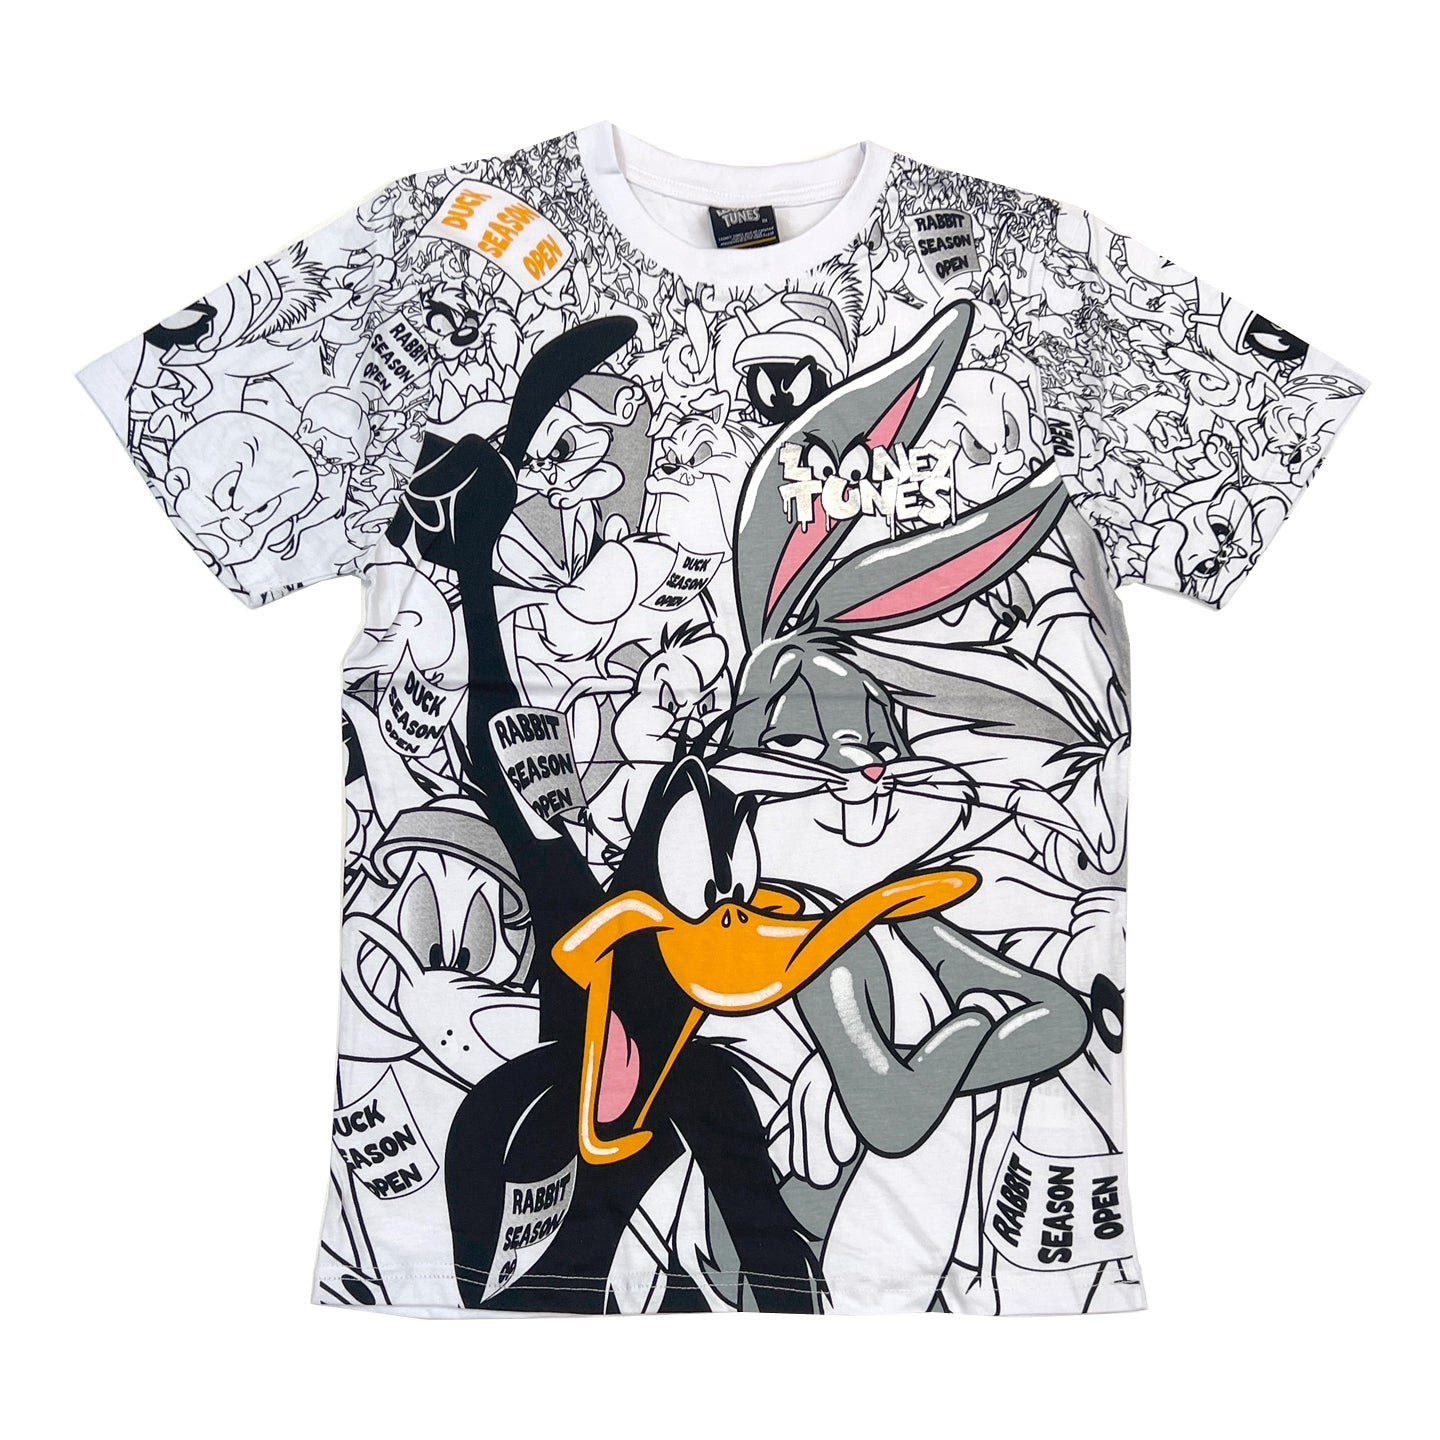 $30 Looney / $16.99 2 Bunny Bugs (White) Tee for & Daffy Tunes